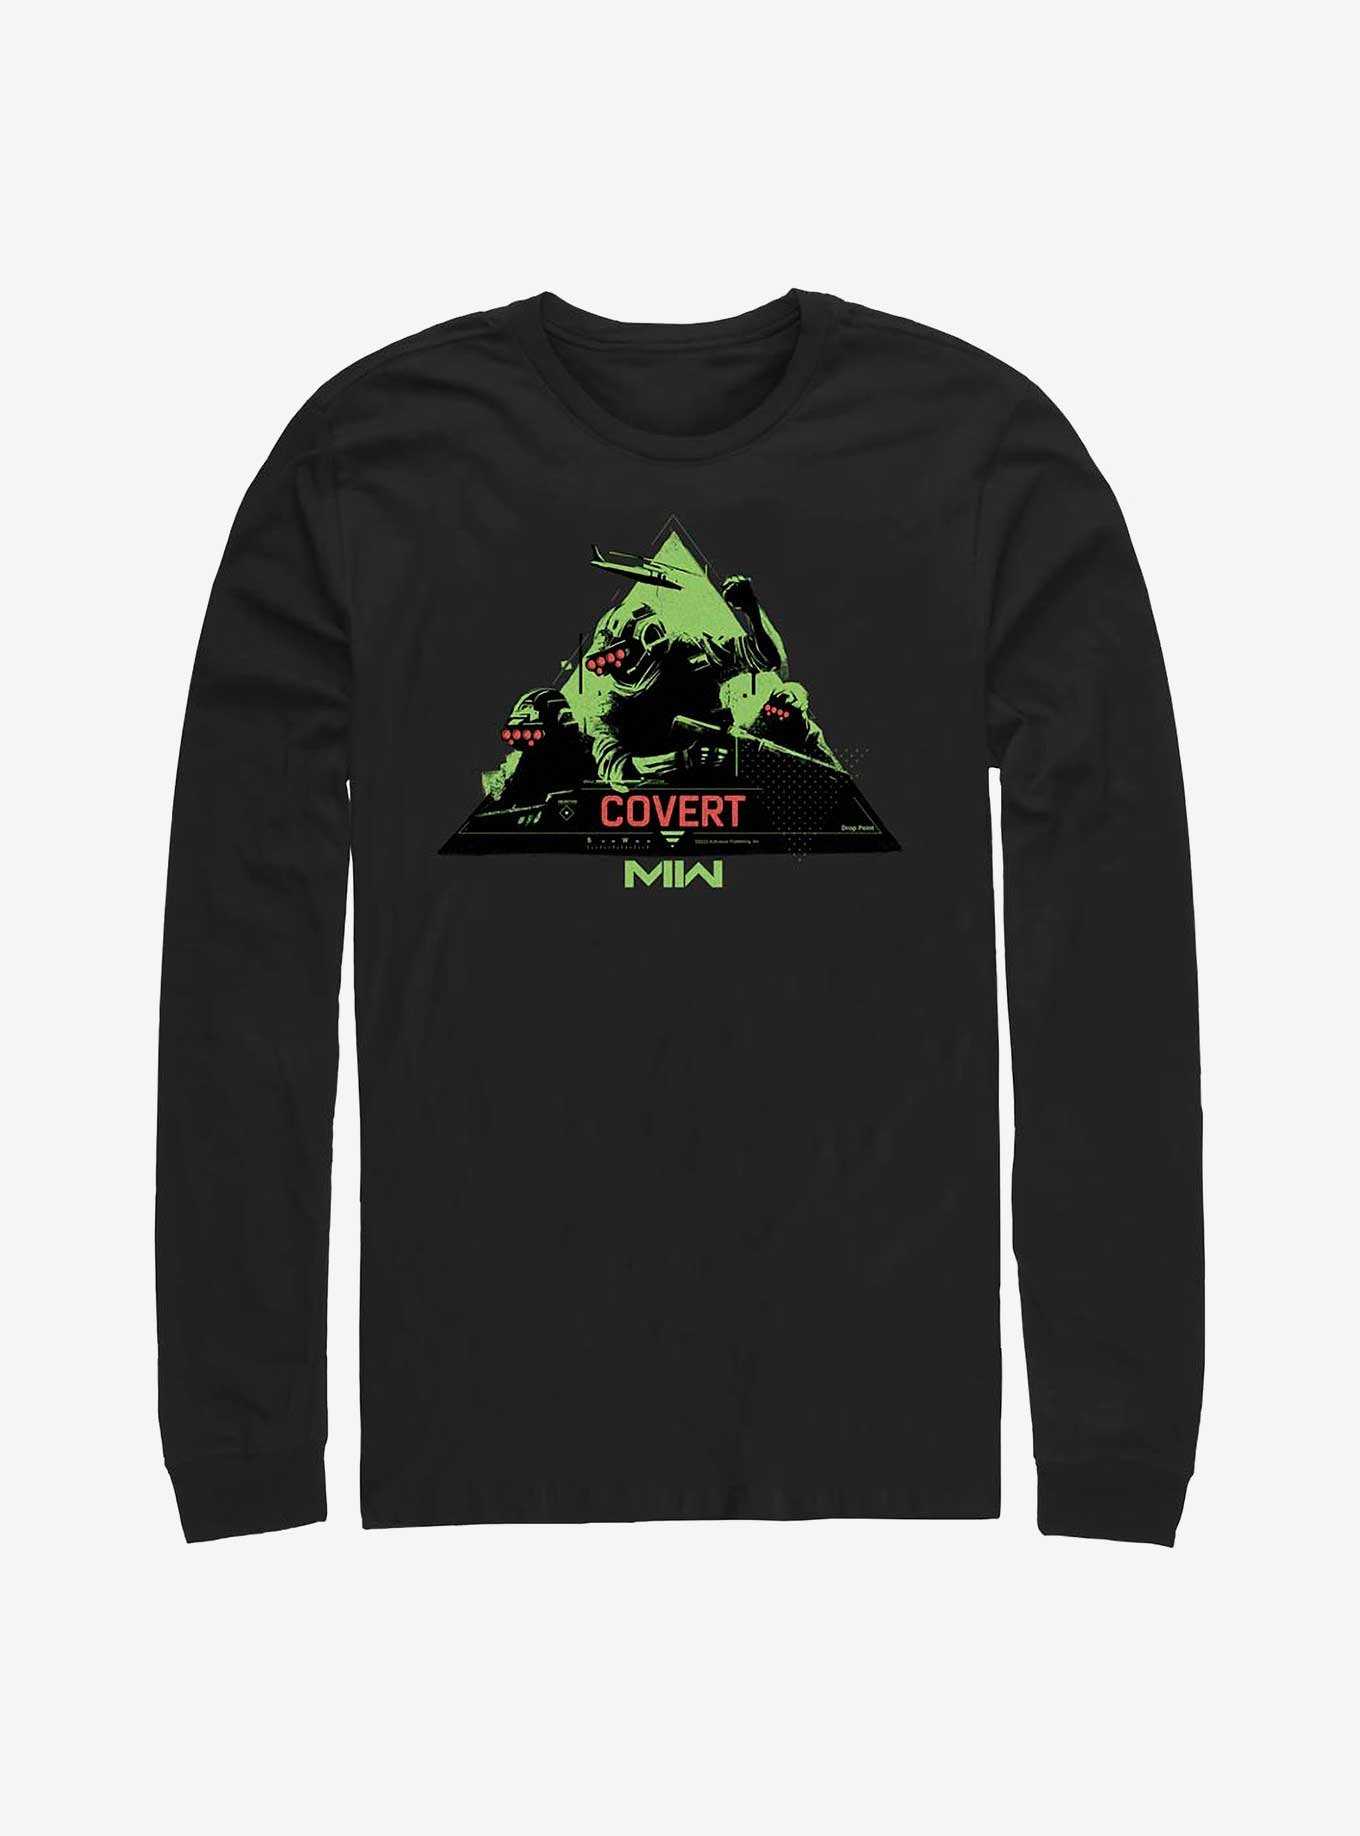 Call Of Duty Mission Covert Long Sleeve T-Shirt, , hi-res